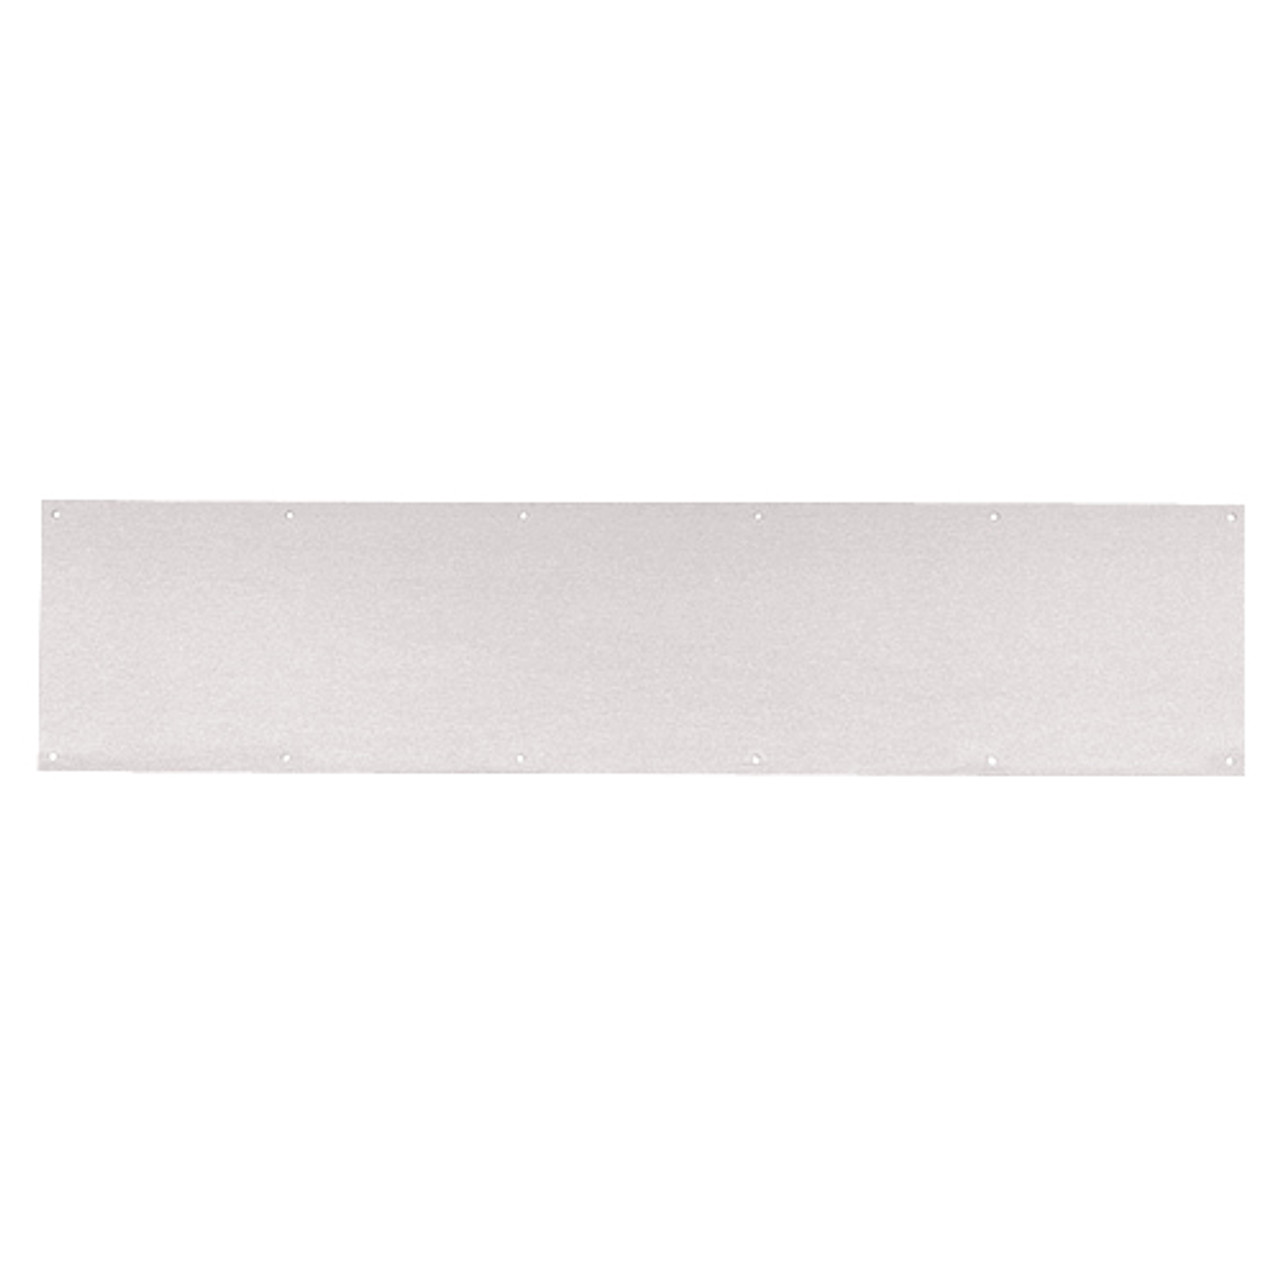 8400-US32-12x30-B-CS Ives 8400 Series Protection Plate in Bright Stainless Steel